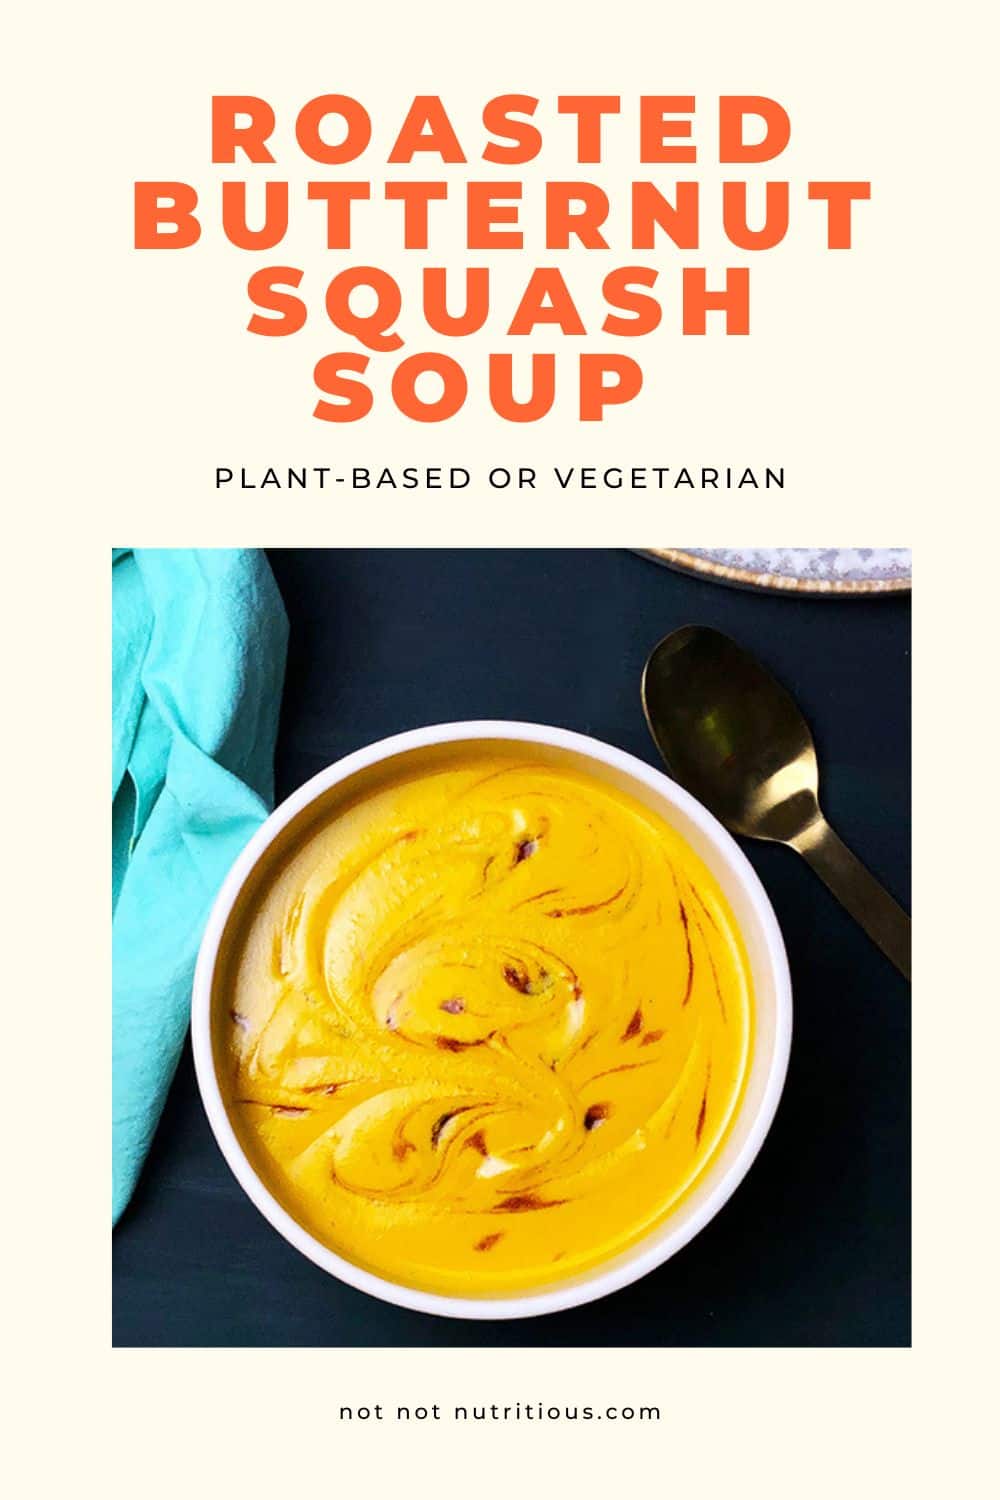 Pin for Roasted Butternut Squash Soup